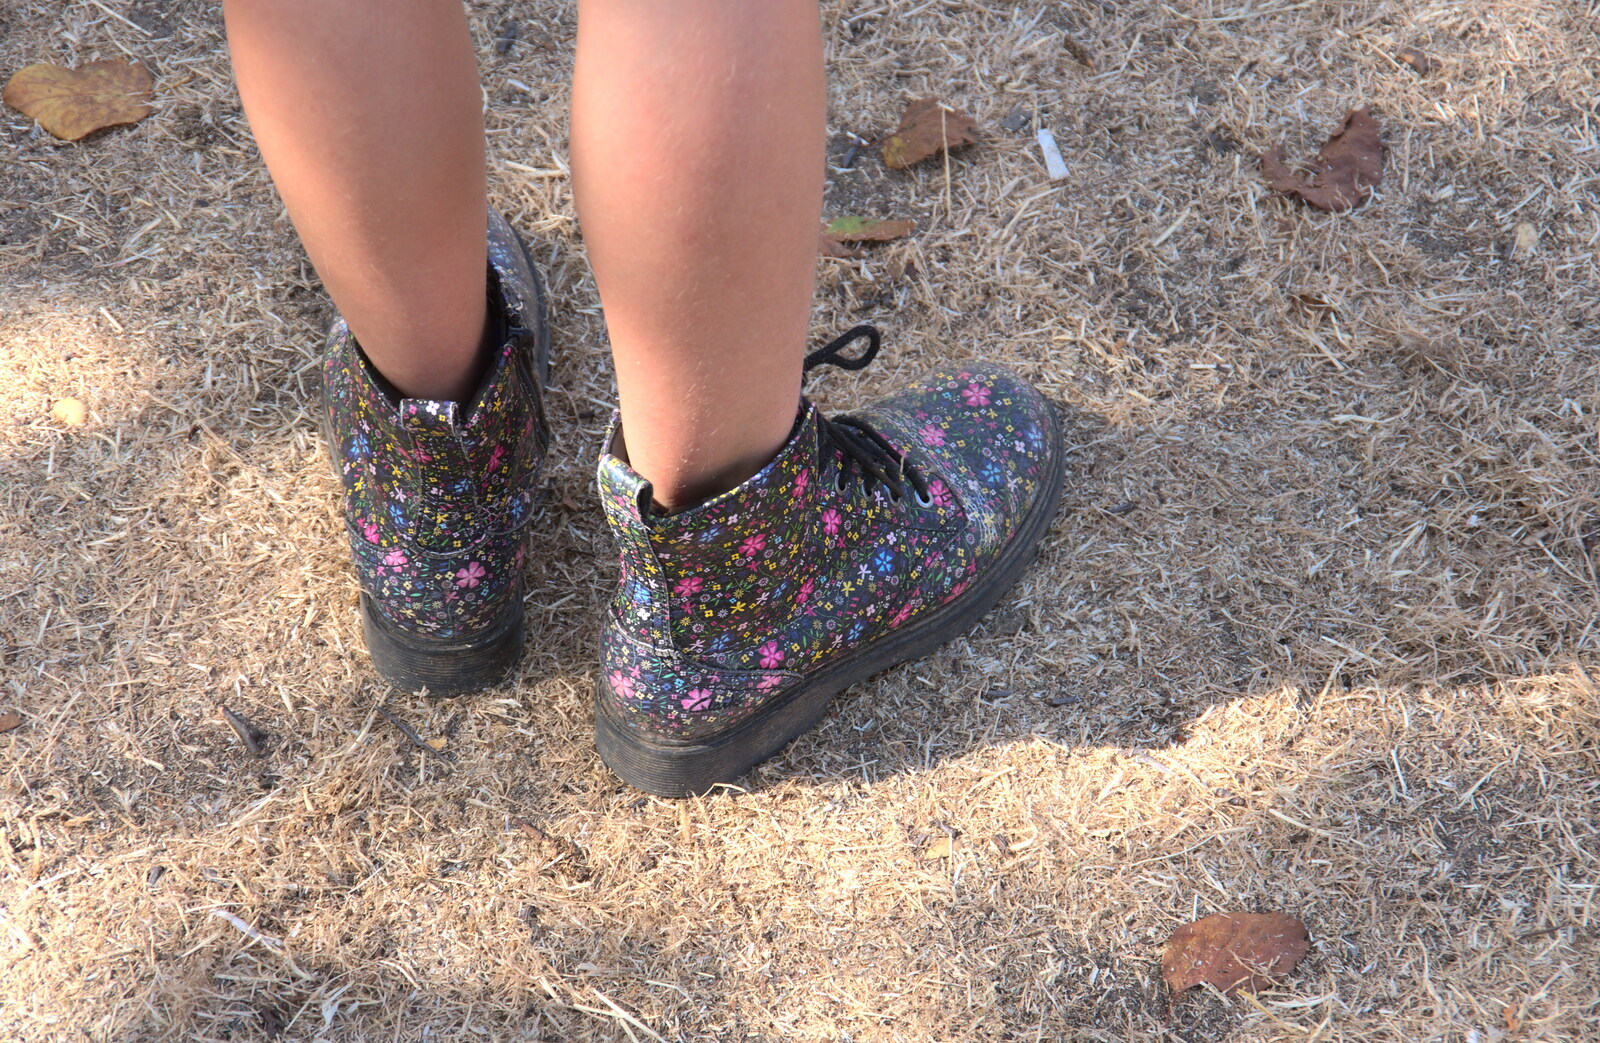 Sophie's funky shoes from Diss Fest, The Park, Diss, Norfolk - 22nd July 2018